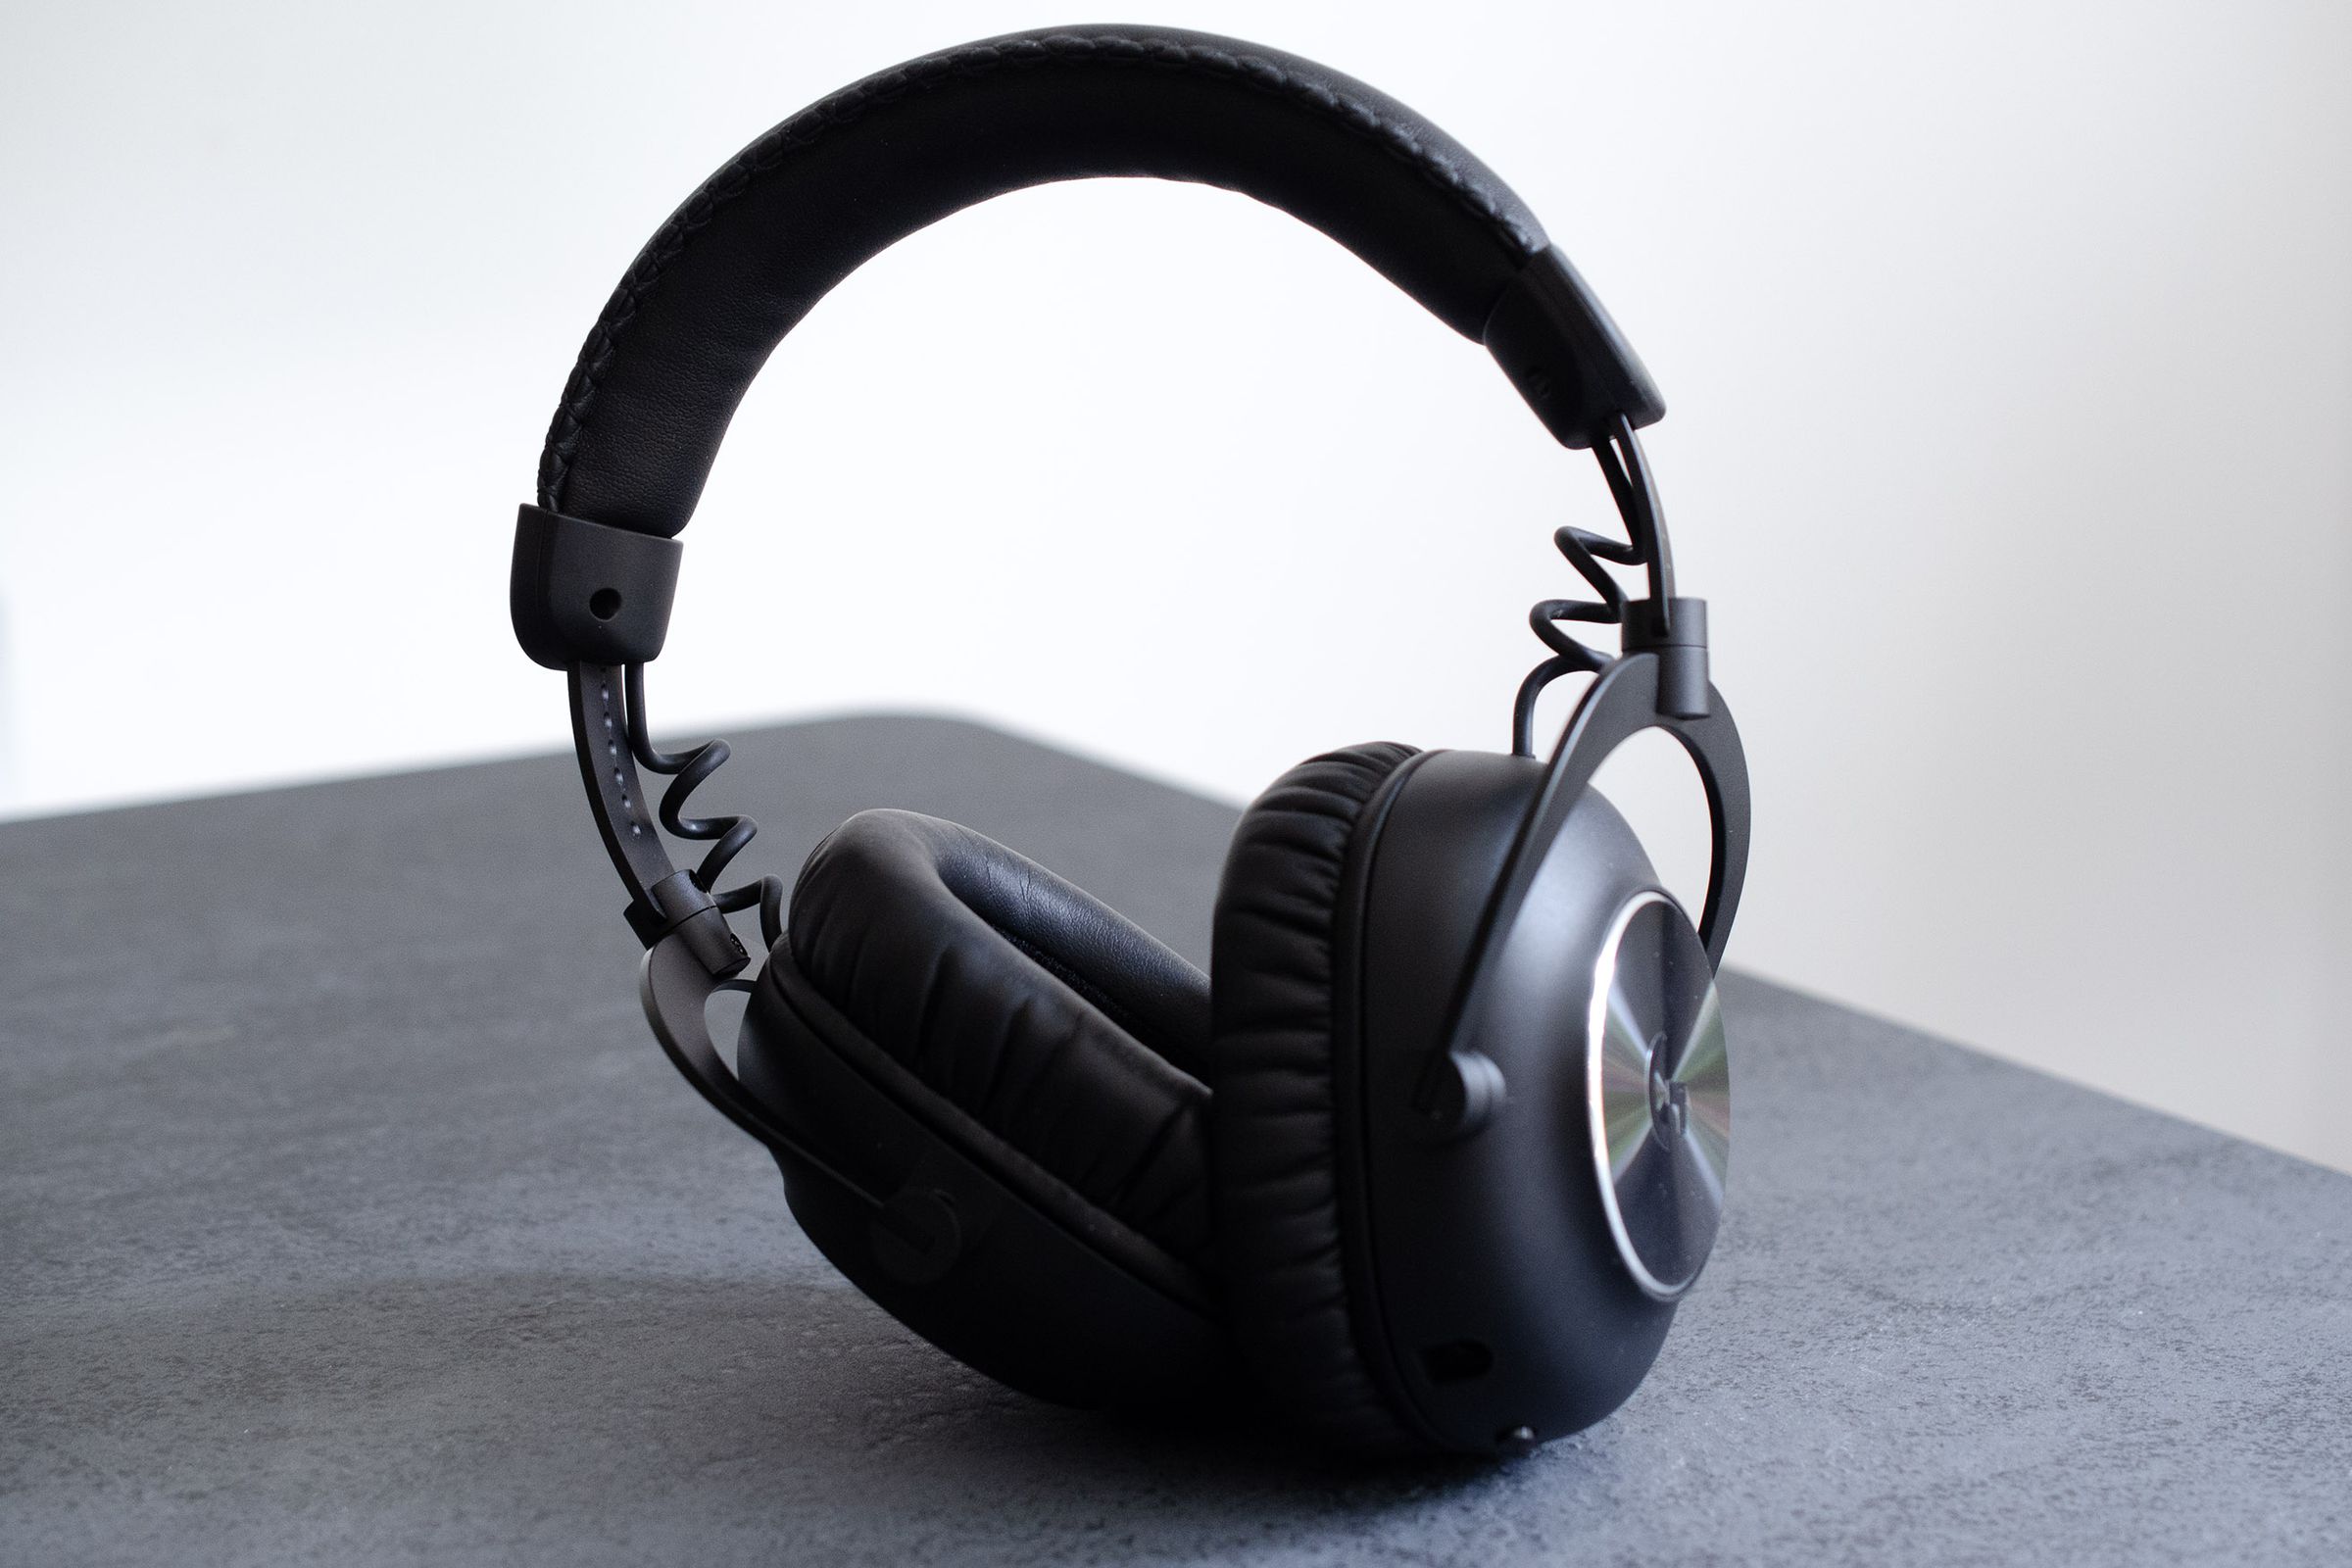 A photo of Logitech’s latest G Pro X 2 headset on a table